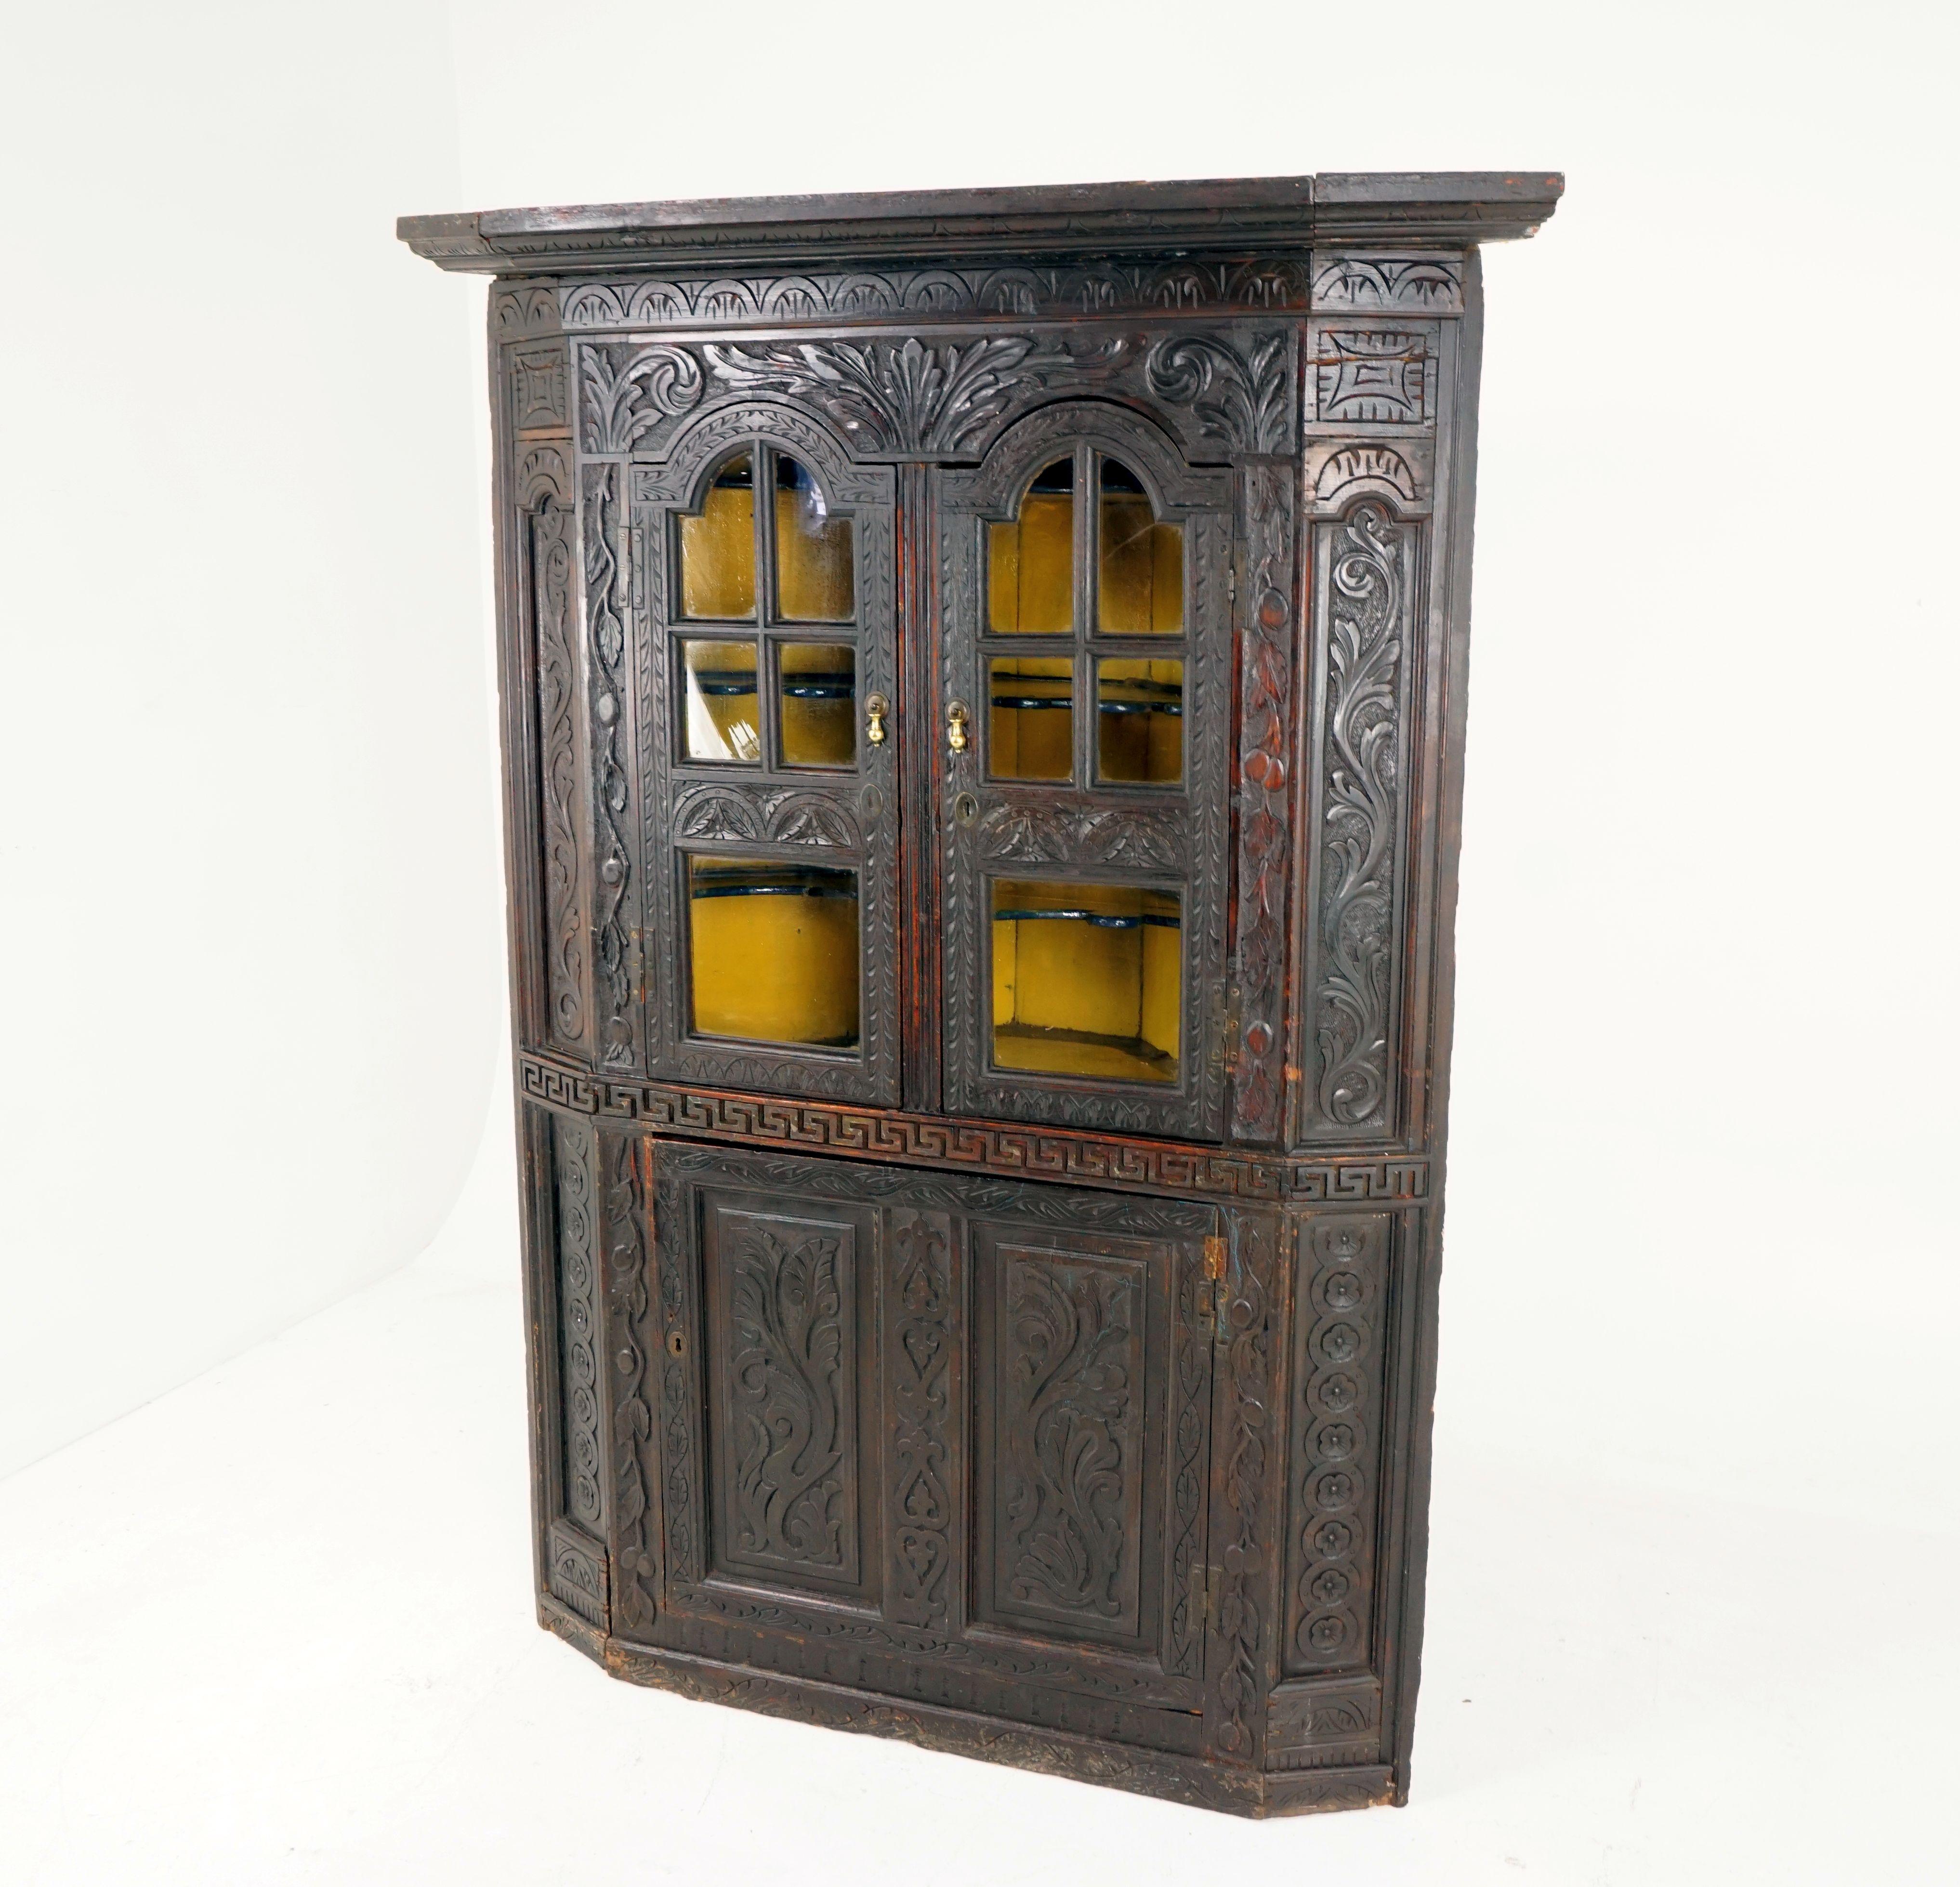 Large Georgian carved Gothic oak corner cabinet cupboard, Scotland, 1780, H127

Scotland 1780-1800
Solid oak
Original finish
Large protruding cornice on top
Carved frieze underneath
Pair of original carved glass doors
Opens to reveal three painted